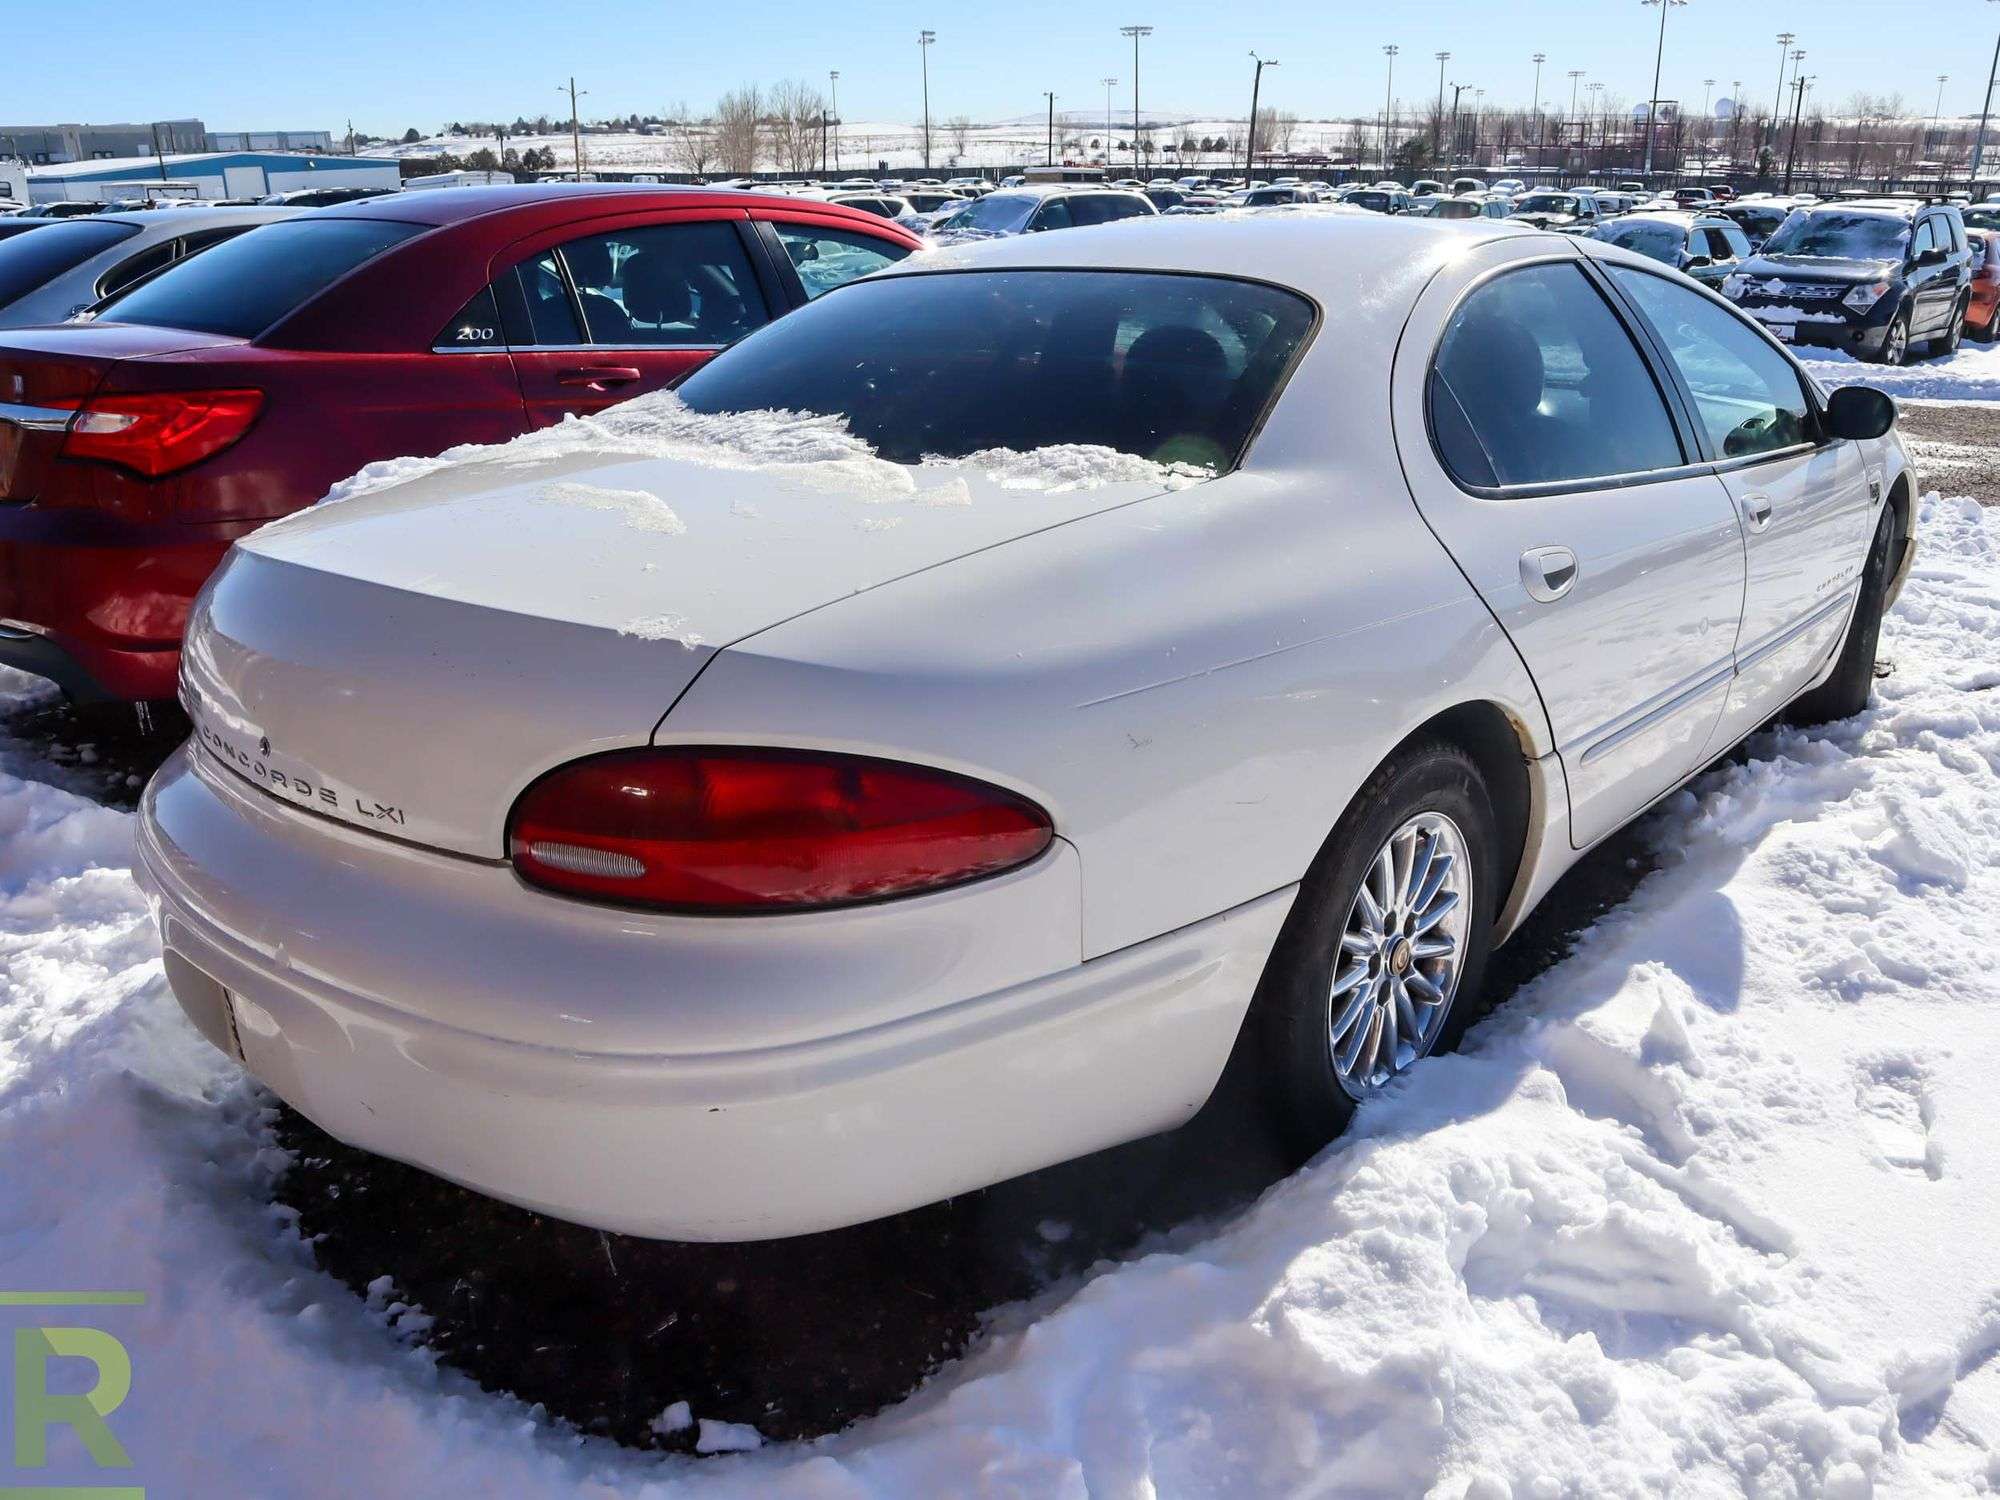 2001 Chrysler Concorde LXi FWD - Roller Auctions